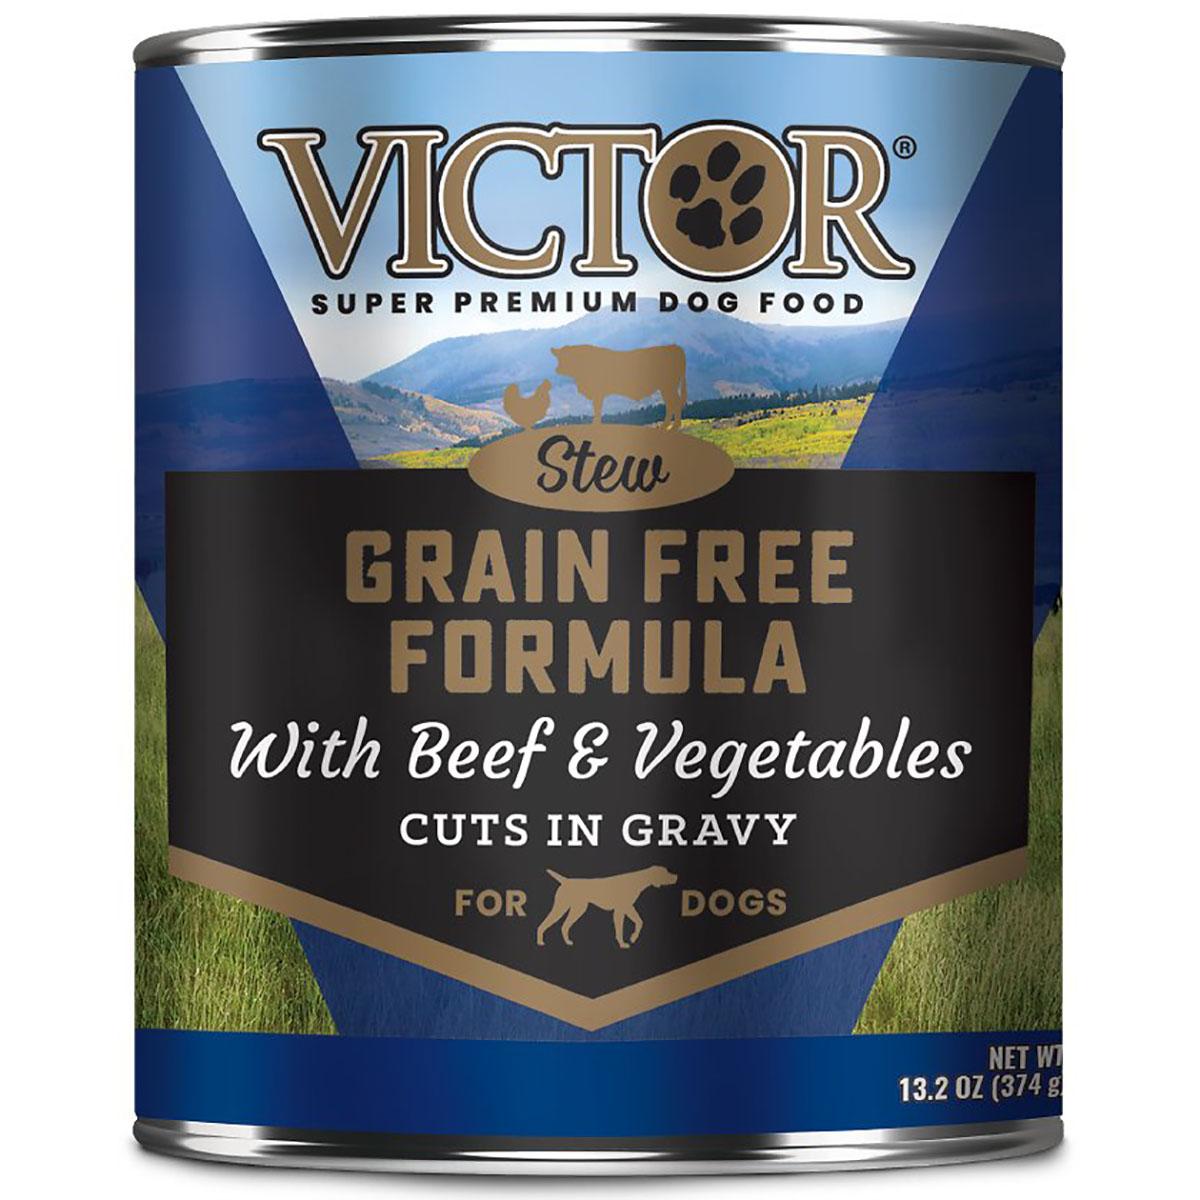 Victor Grain-Free Beef & Vegetables Stew Cuts in Gravy Canned Dog Food